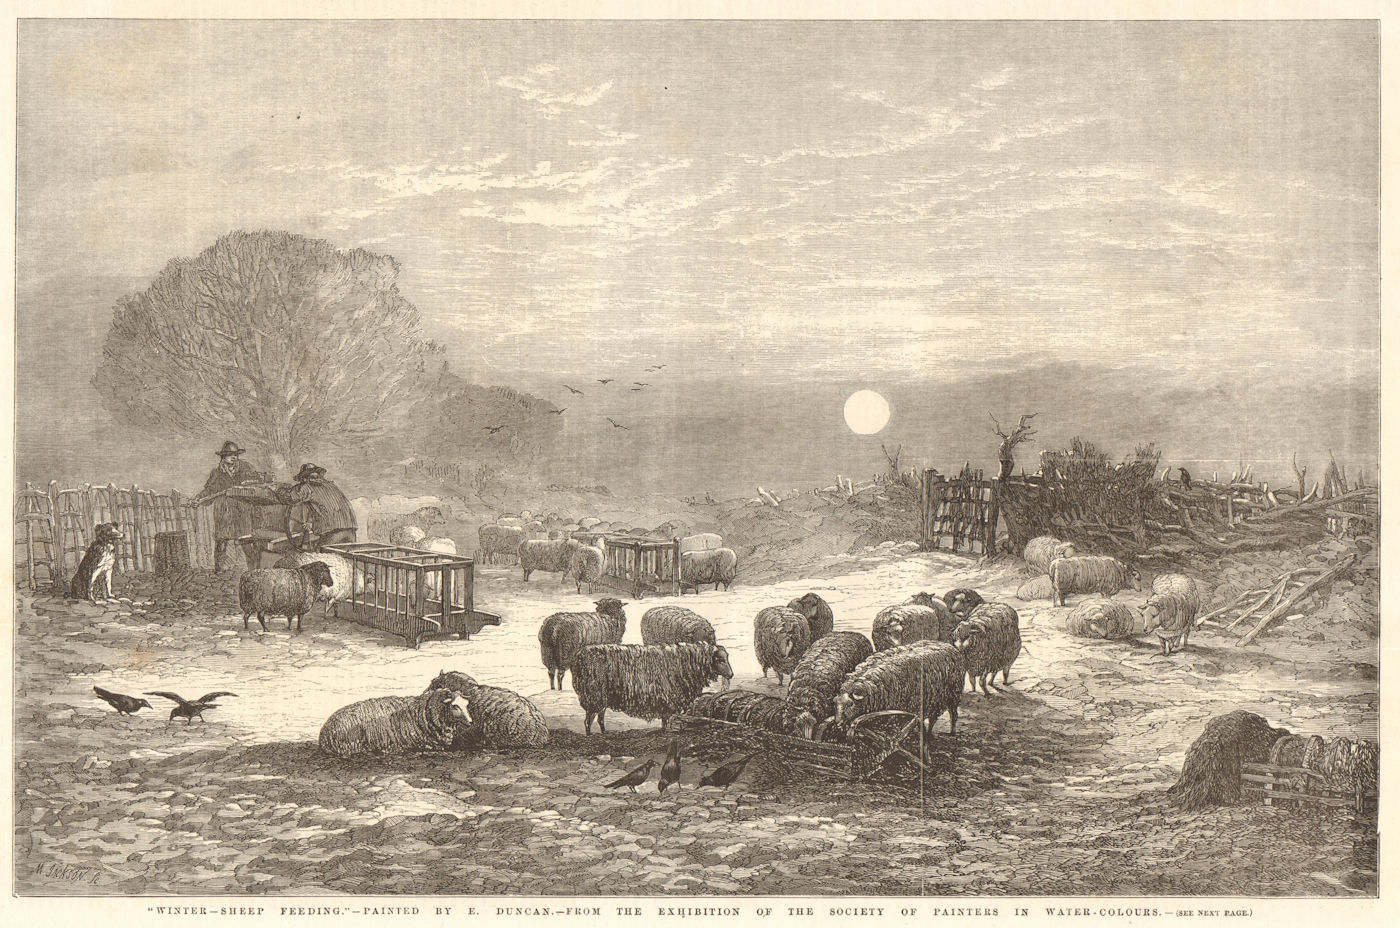 Associate Product "Winter - sheep feeding" - by E. Duncan. Farming 1857 old antique print